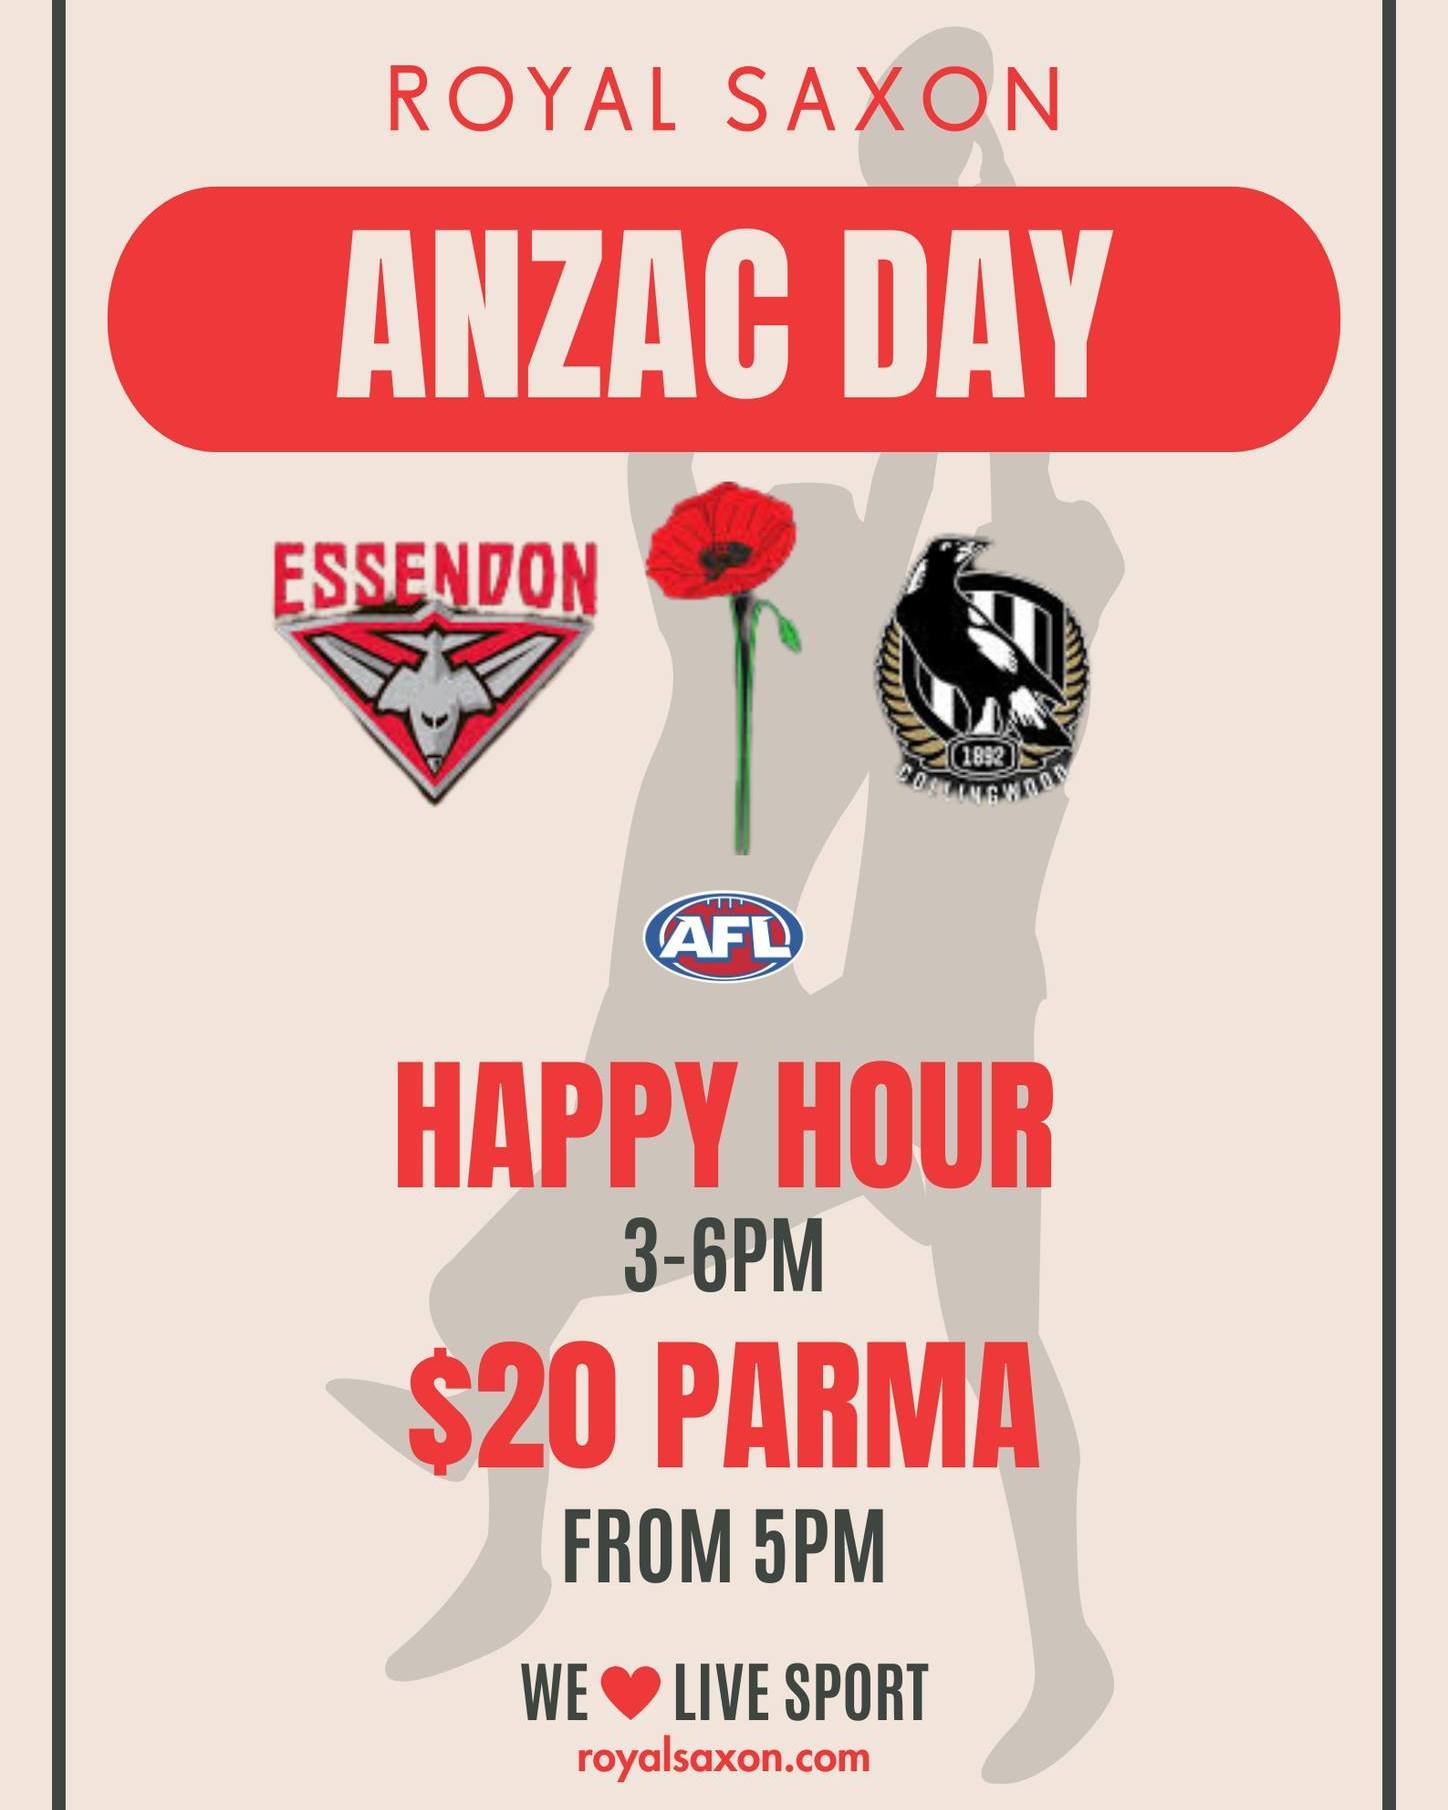 It's ANZAC Day next week - here's what's happening at the Royal Saxon:

@afl live and loud on six screens - check out our new TV in the courtyard!
Happy Hour from 3-6pm, including schooners from $6, $7 wines and spirits and $14 cocktails!
Parma Night